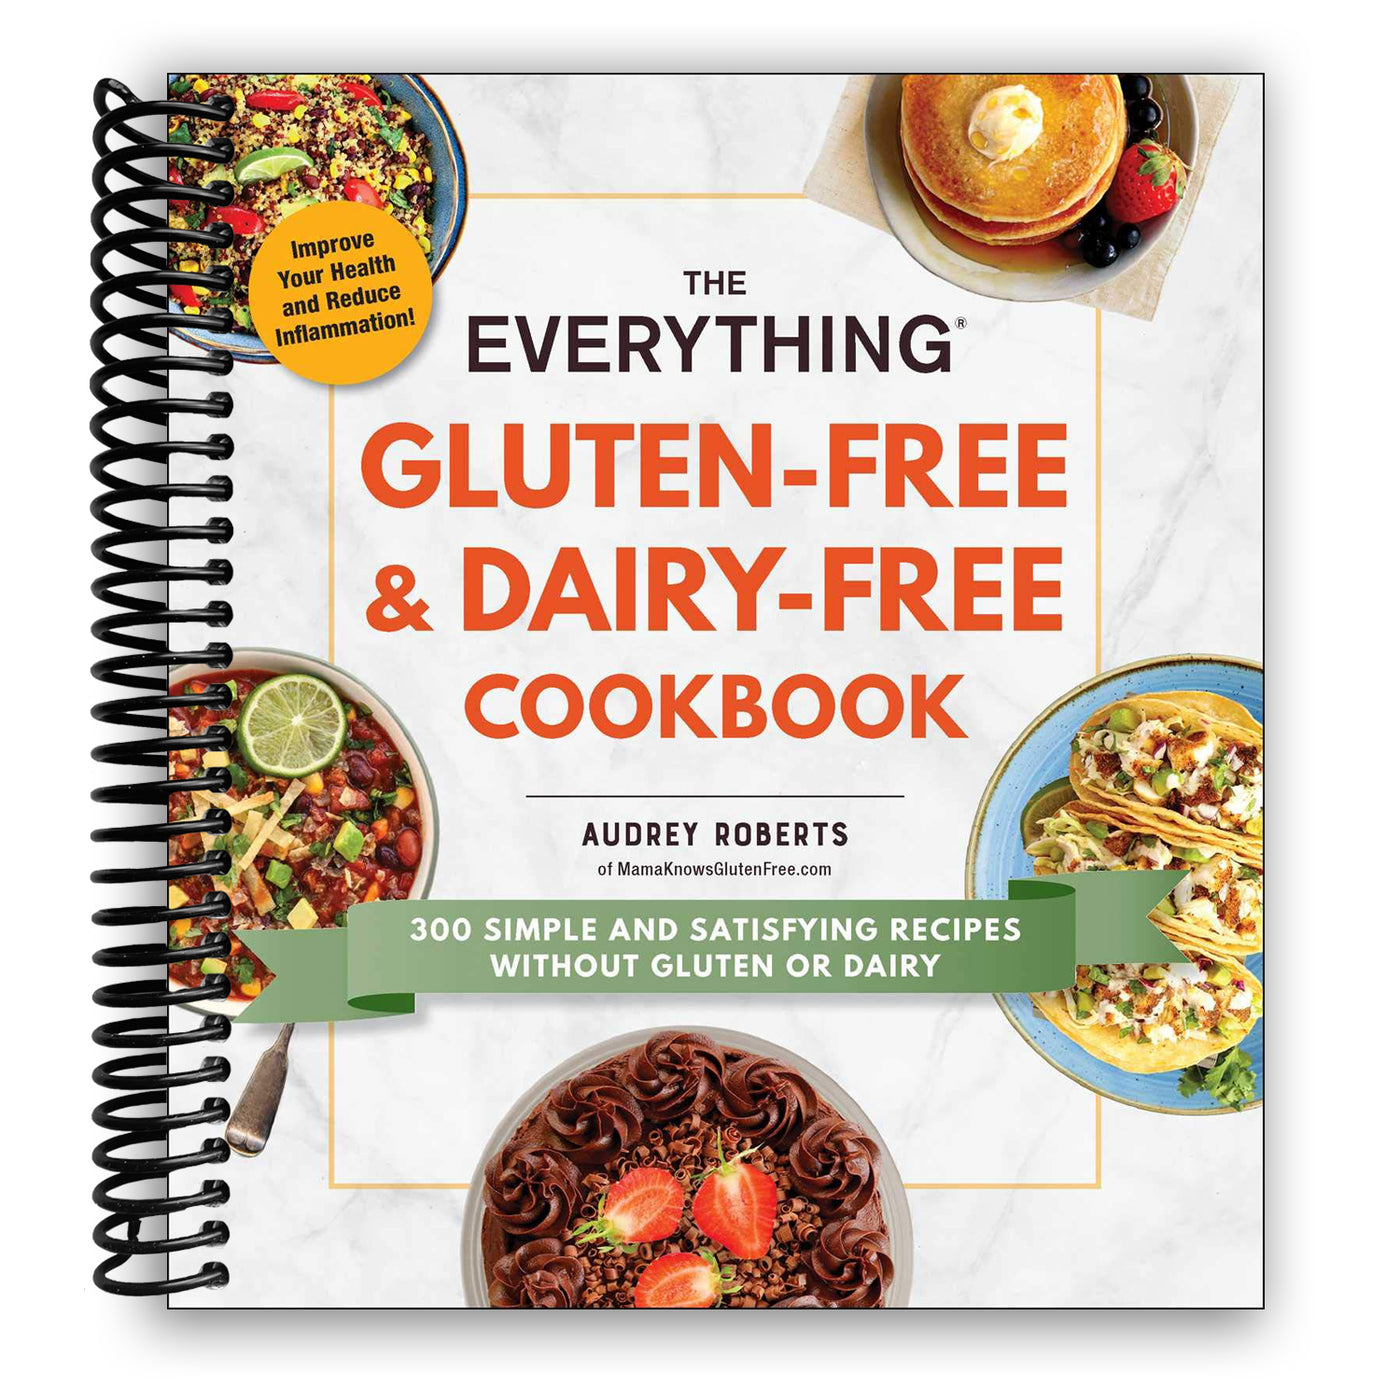 The Everything Gluten-Free & Dairy-Free Cookbook: 300 Simple and Satisfying Recipes Without Gluten or Dairy (Spiral Bound)